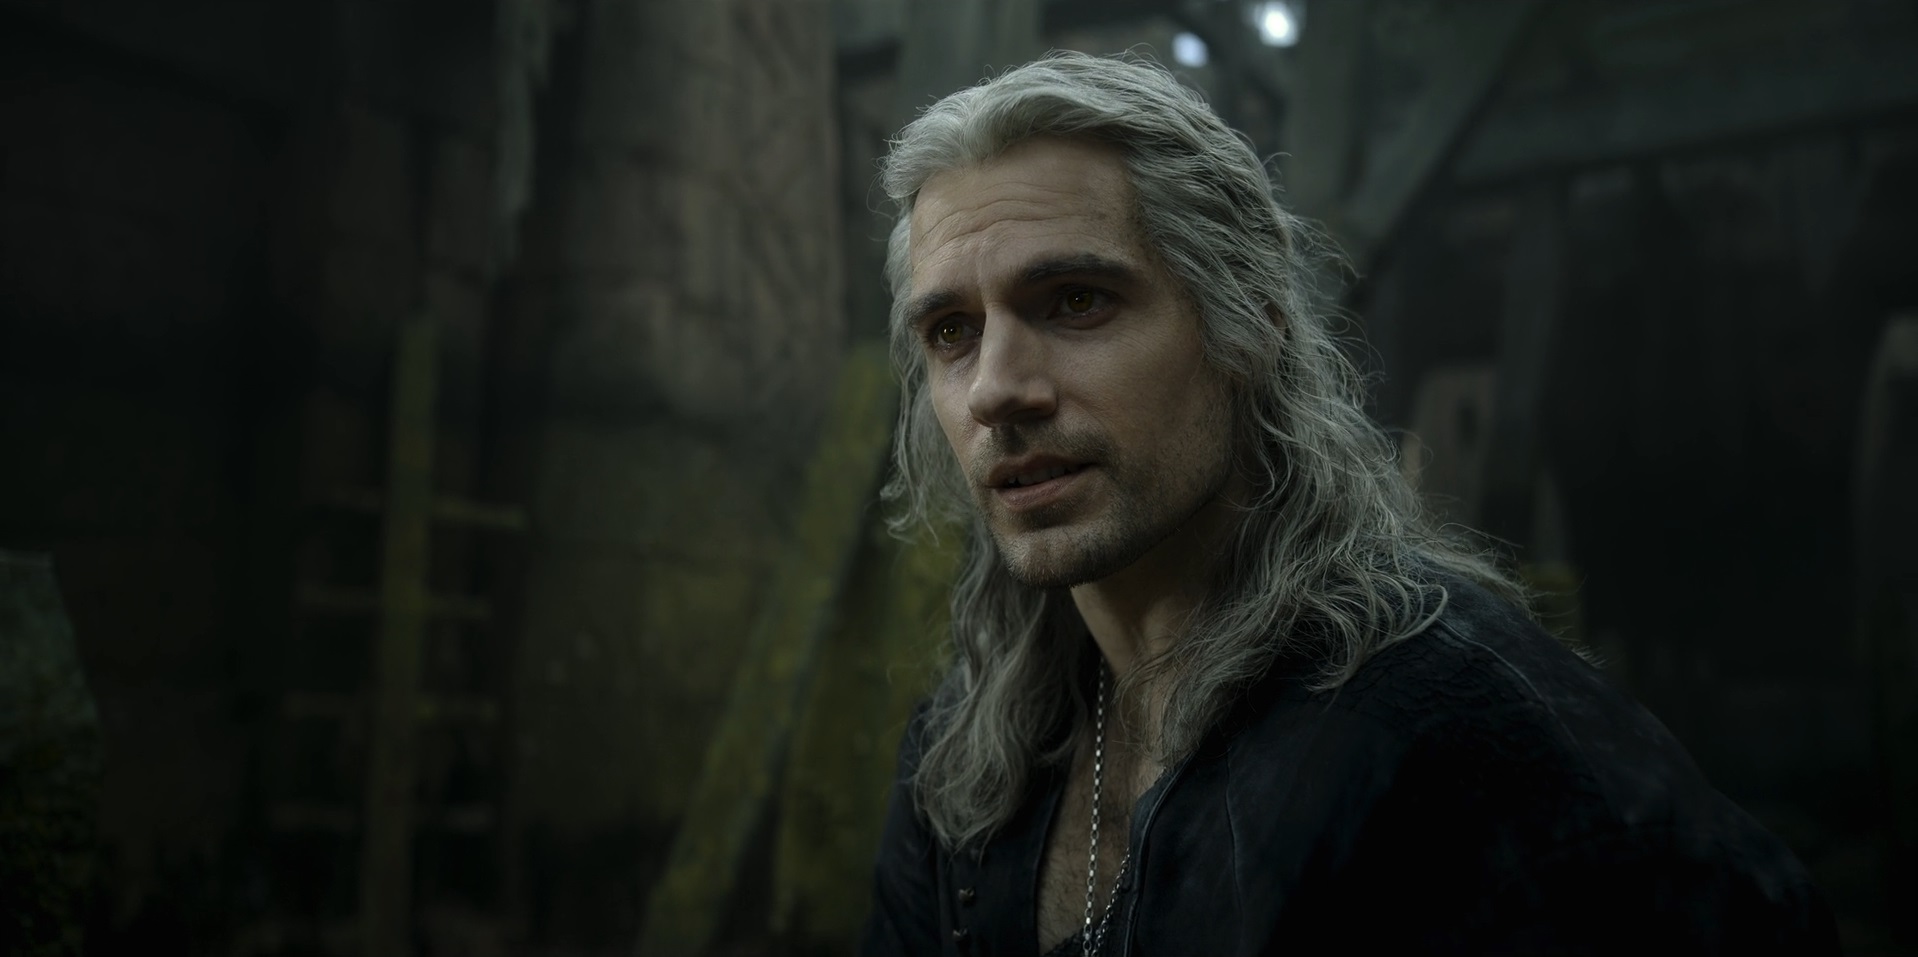 Roundup: New interviews with The Witcher cast, including Henry Cavill -  Redanian Intelligence